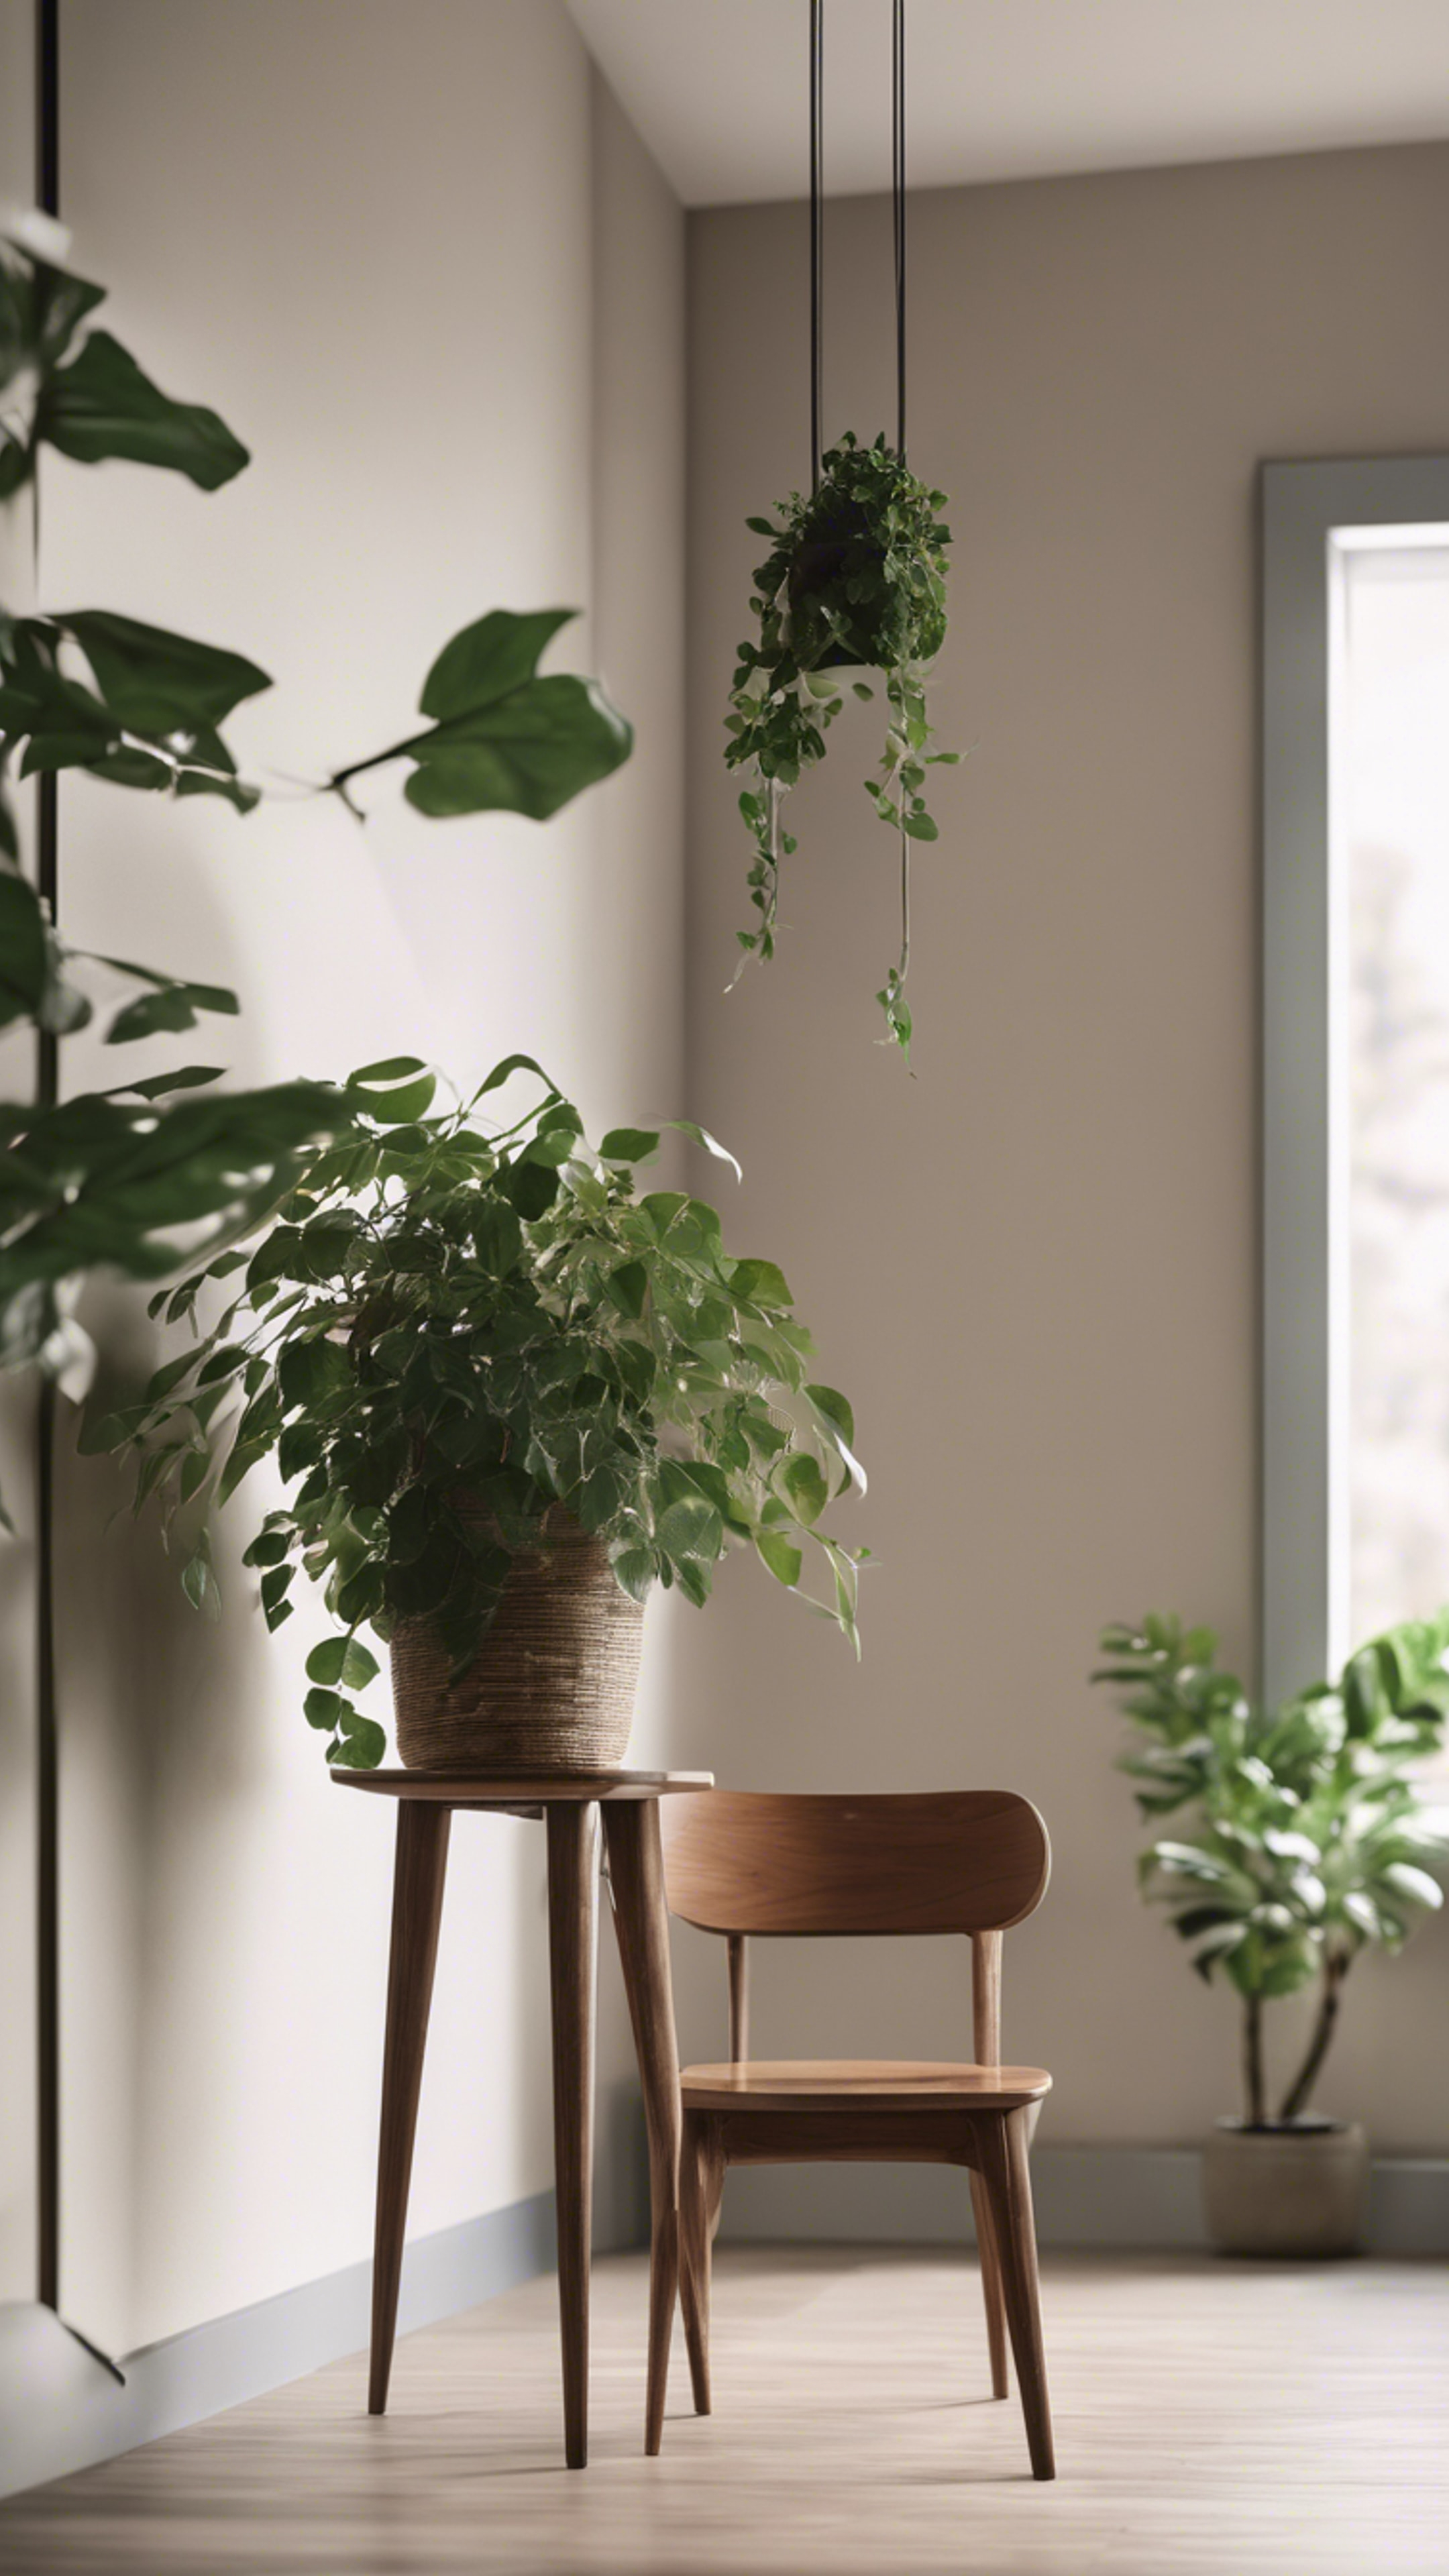 The corner of a minimalist room, featuring a hanging plant and a low, wooden side table.壁紙[20a0de2ec9c541069b04]